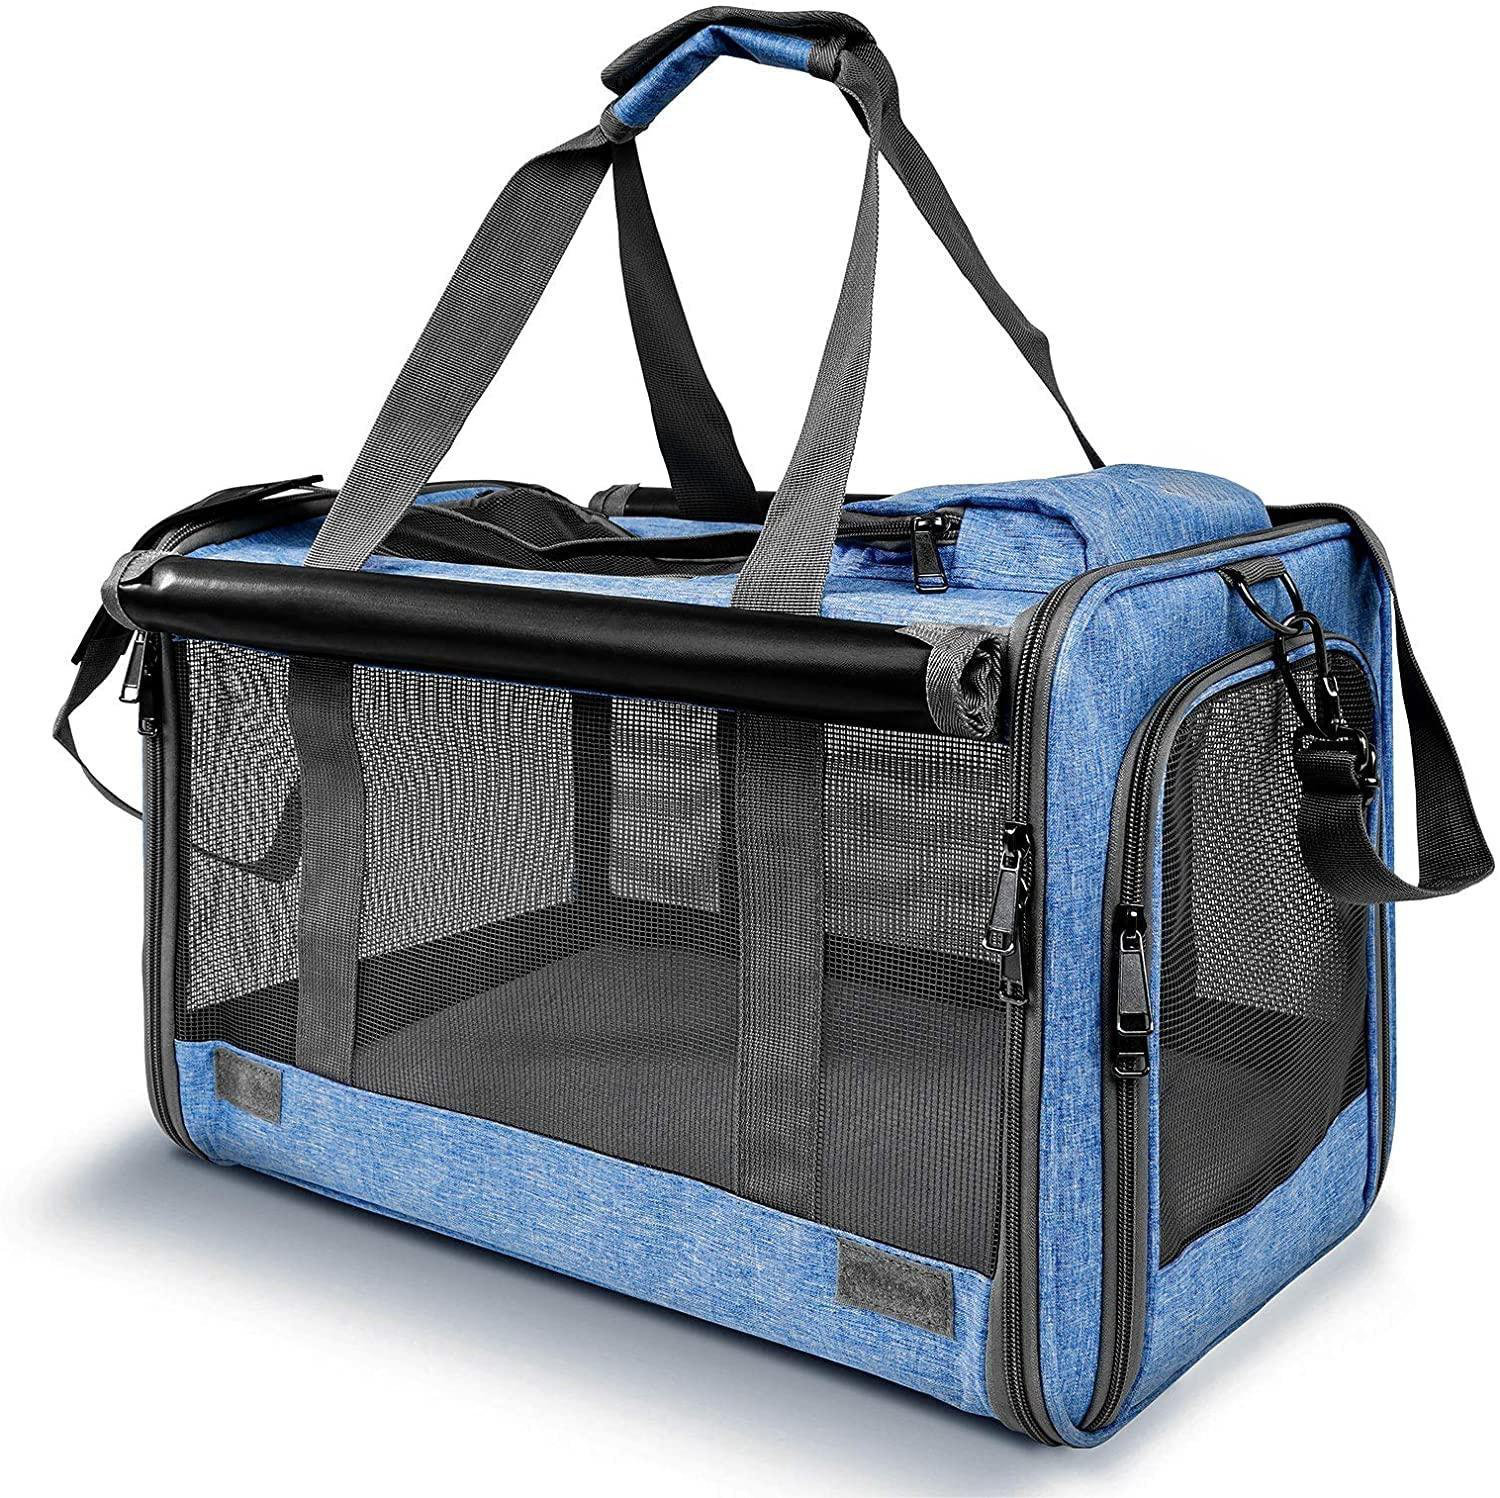 Cat Carrier, Pet Carrier for Large Cats, Soft-Sided Cat Carrier with a  Bowl/Front Storage Bag for Small Medium Cats Dogs up to 20lbs, Collapsible  Travel Cat Carrier, TSA Approved(Blue) 